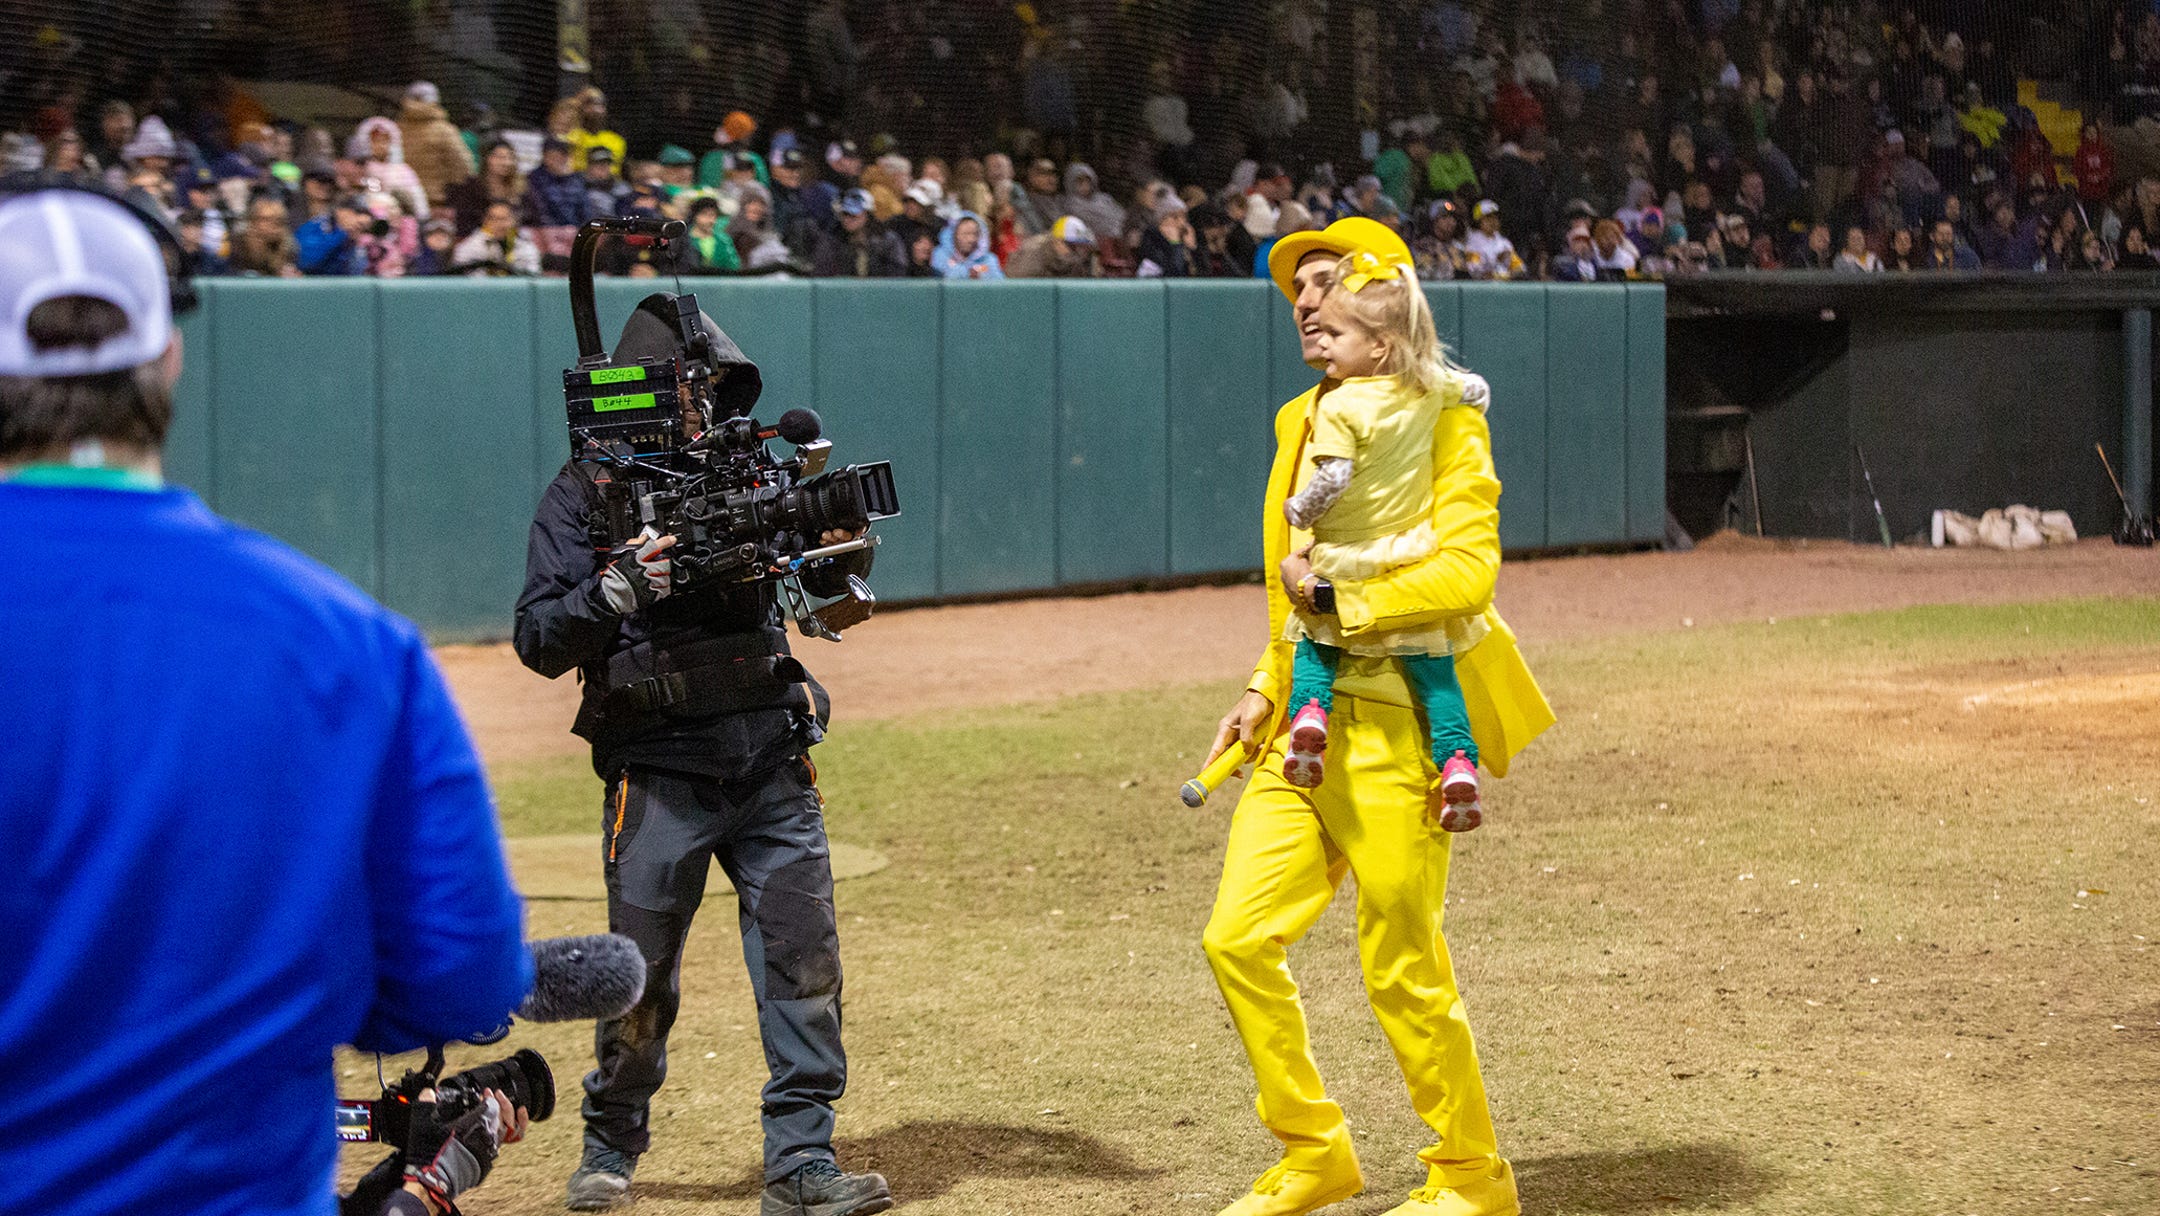 This team is reinventing baseball one game at a time. Banana Ball